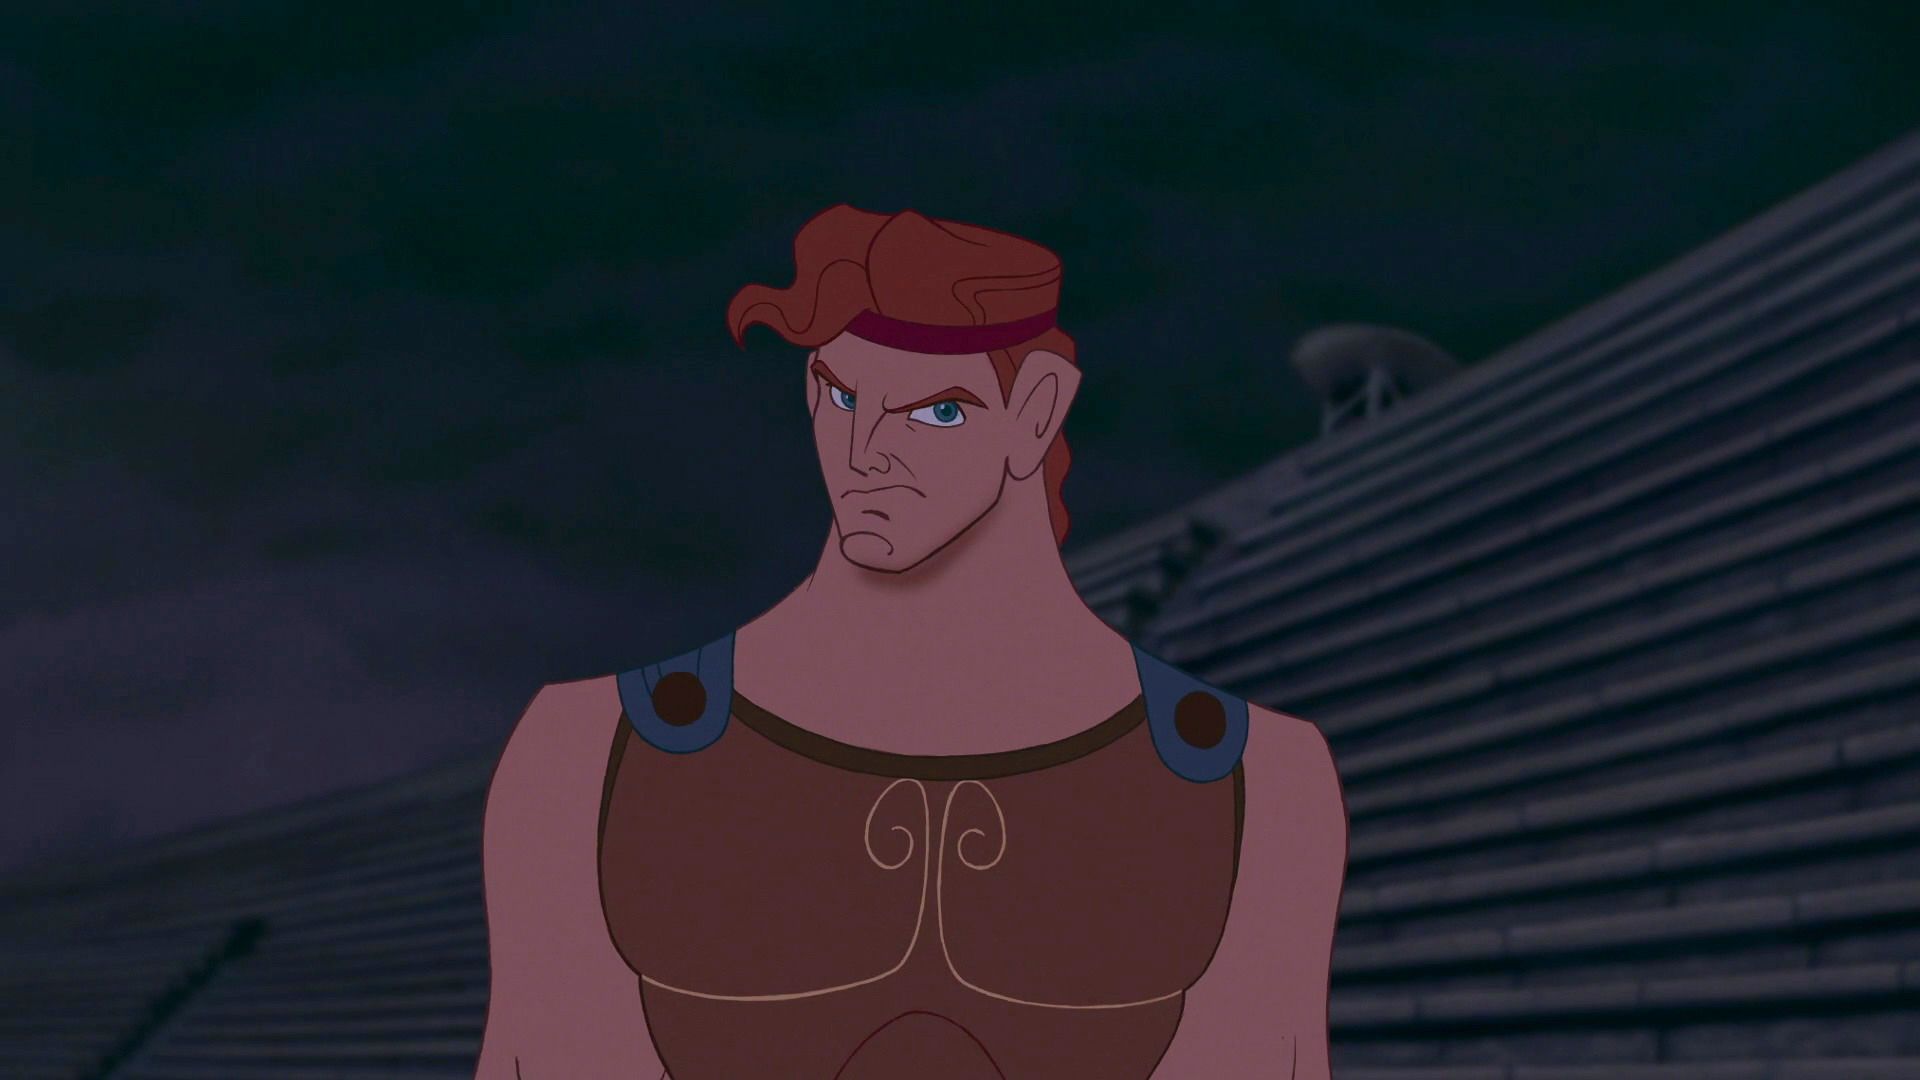 Guy Ritchie's Live-Action Hercules Will Be TikTok-Inspired